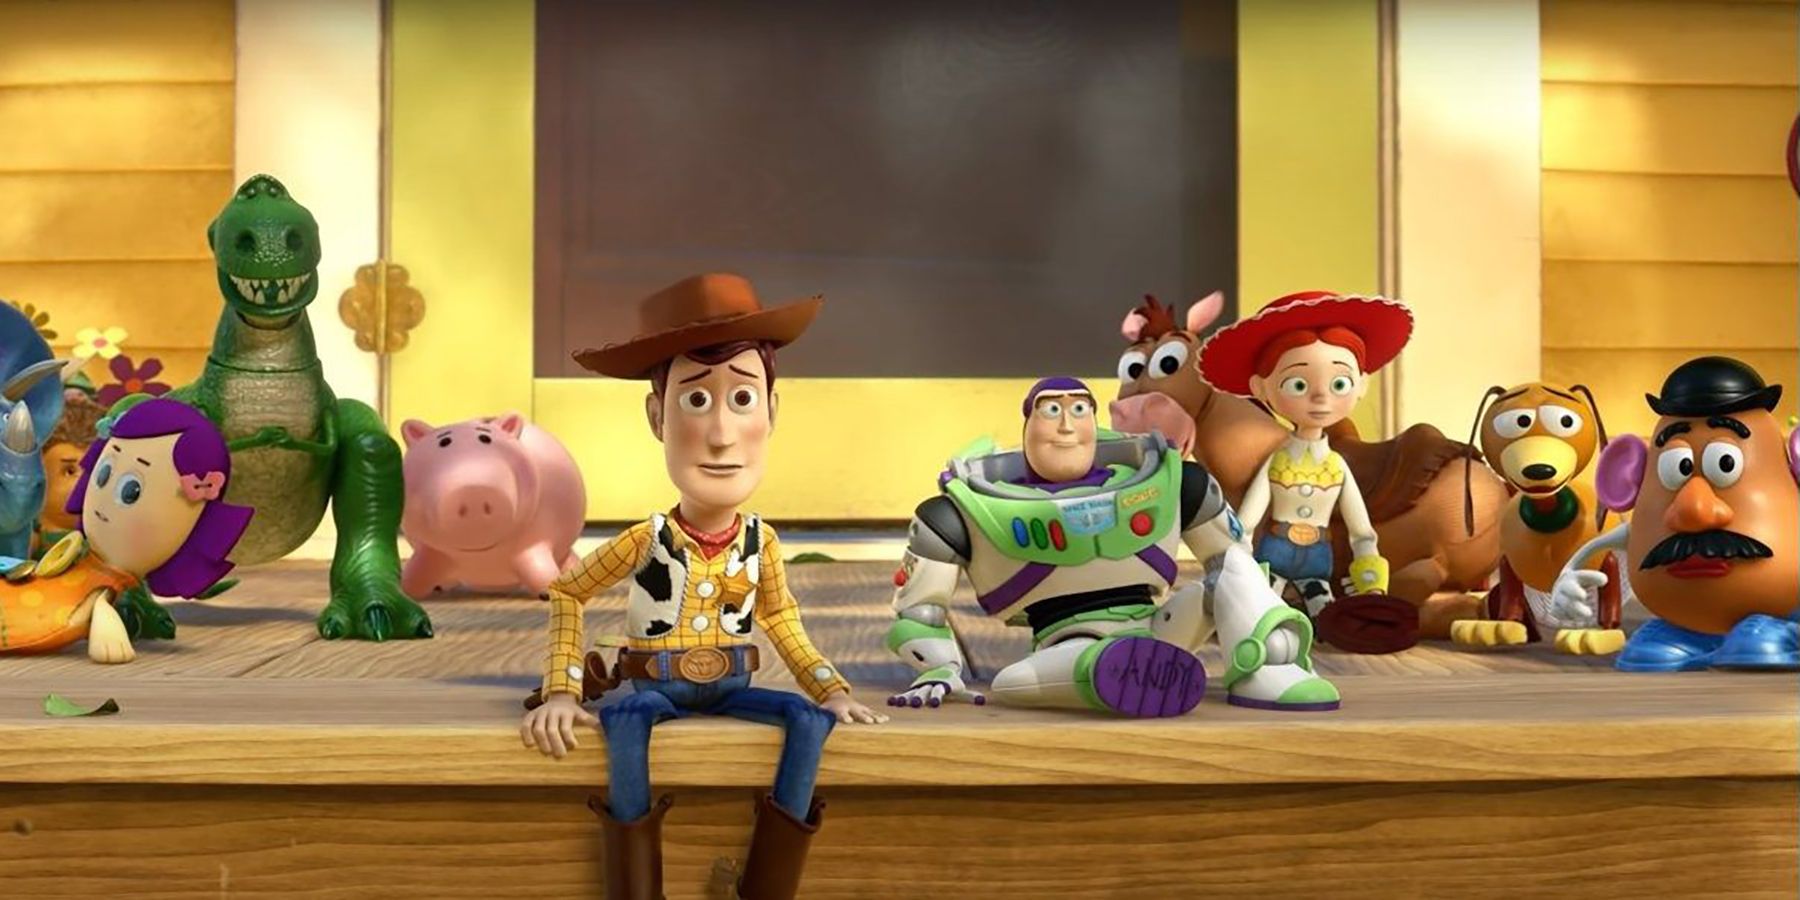 Toy Story 3' scene goes viral after audiences hear two different